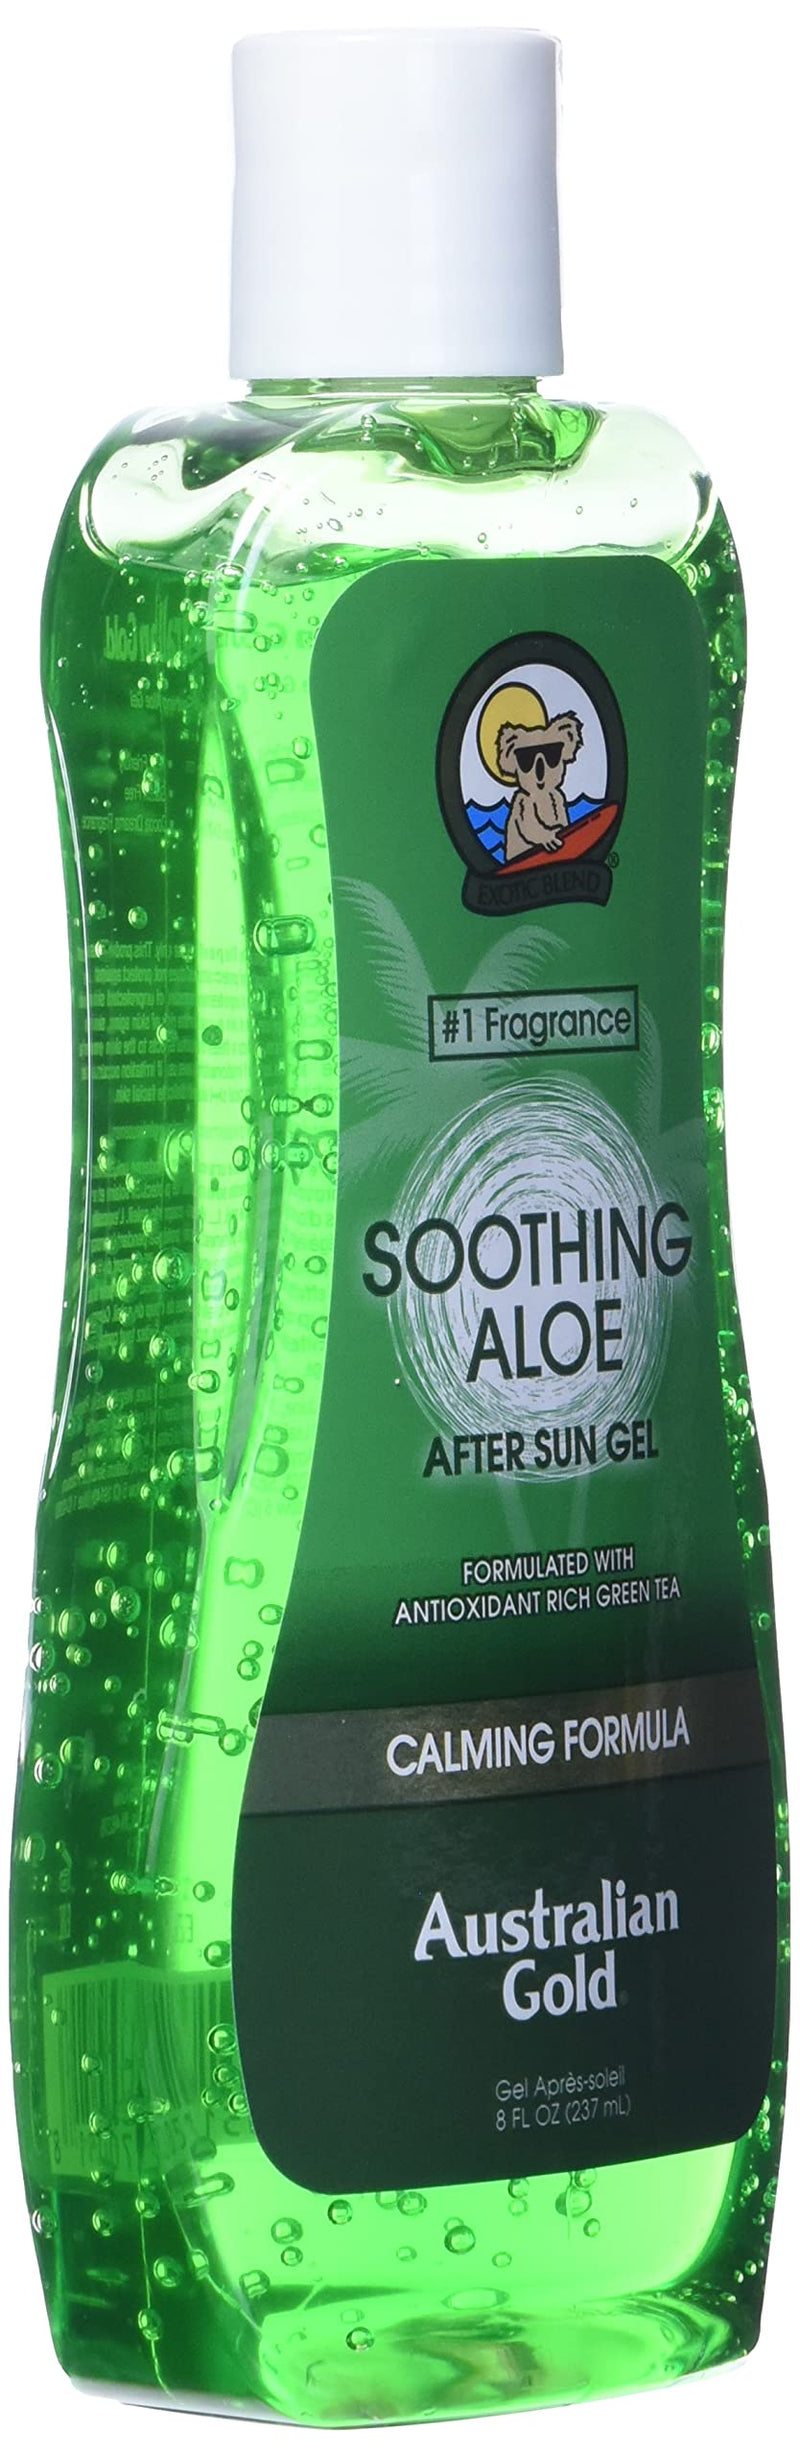 Australian Gold Soothing Aloe Vera After Sun Gel -Relieves Sunburn Pain and Hot & Itchy Skin, Soothing Aloe After Sun Gel, 8 Fl Oz (A70623-1) - BeesActive Australia